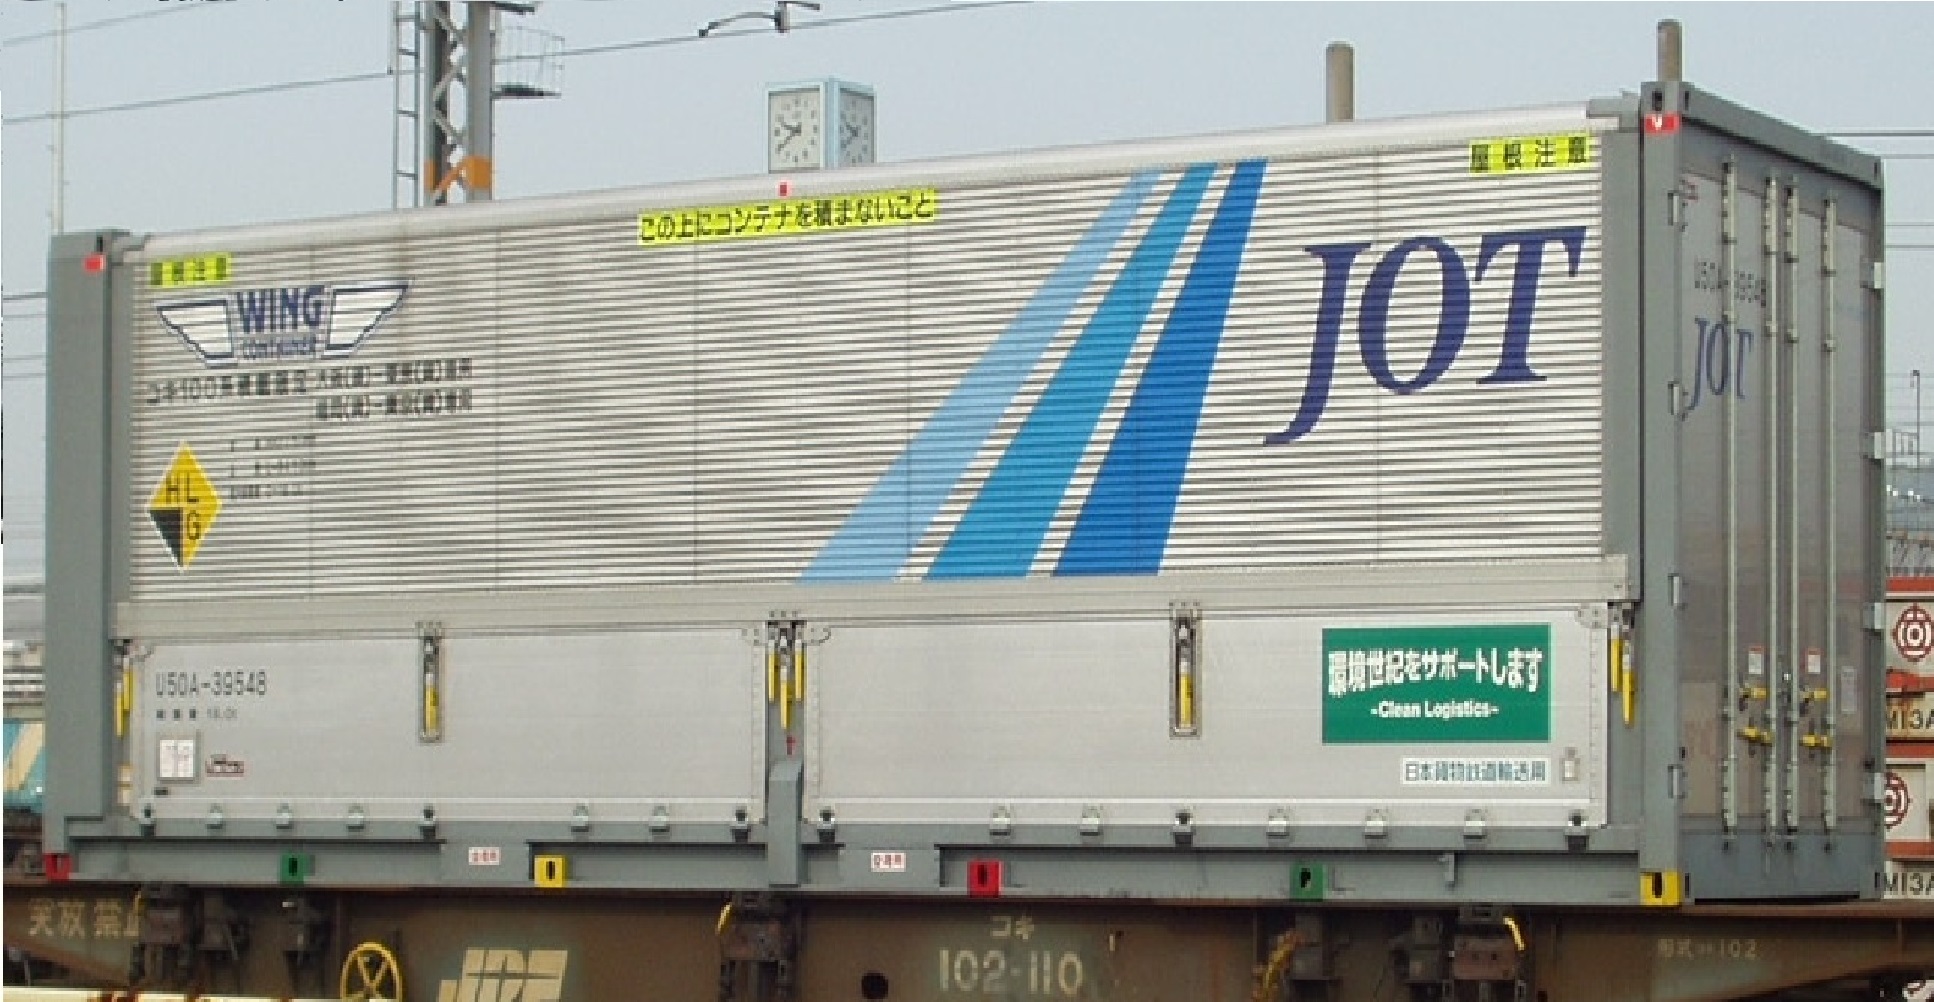 File:U50A-39548 【JOT日本石油輸送】Containers of Japan Rail.jpg 